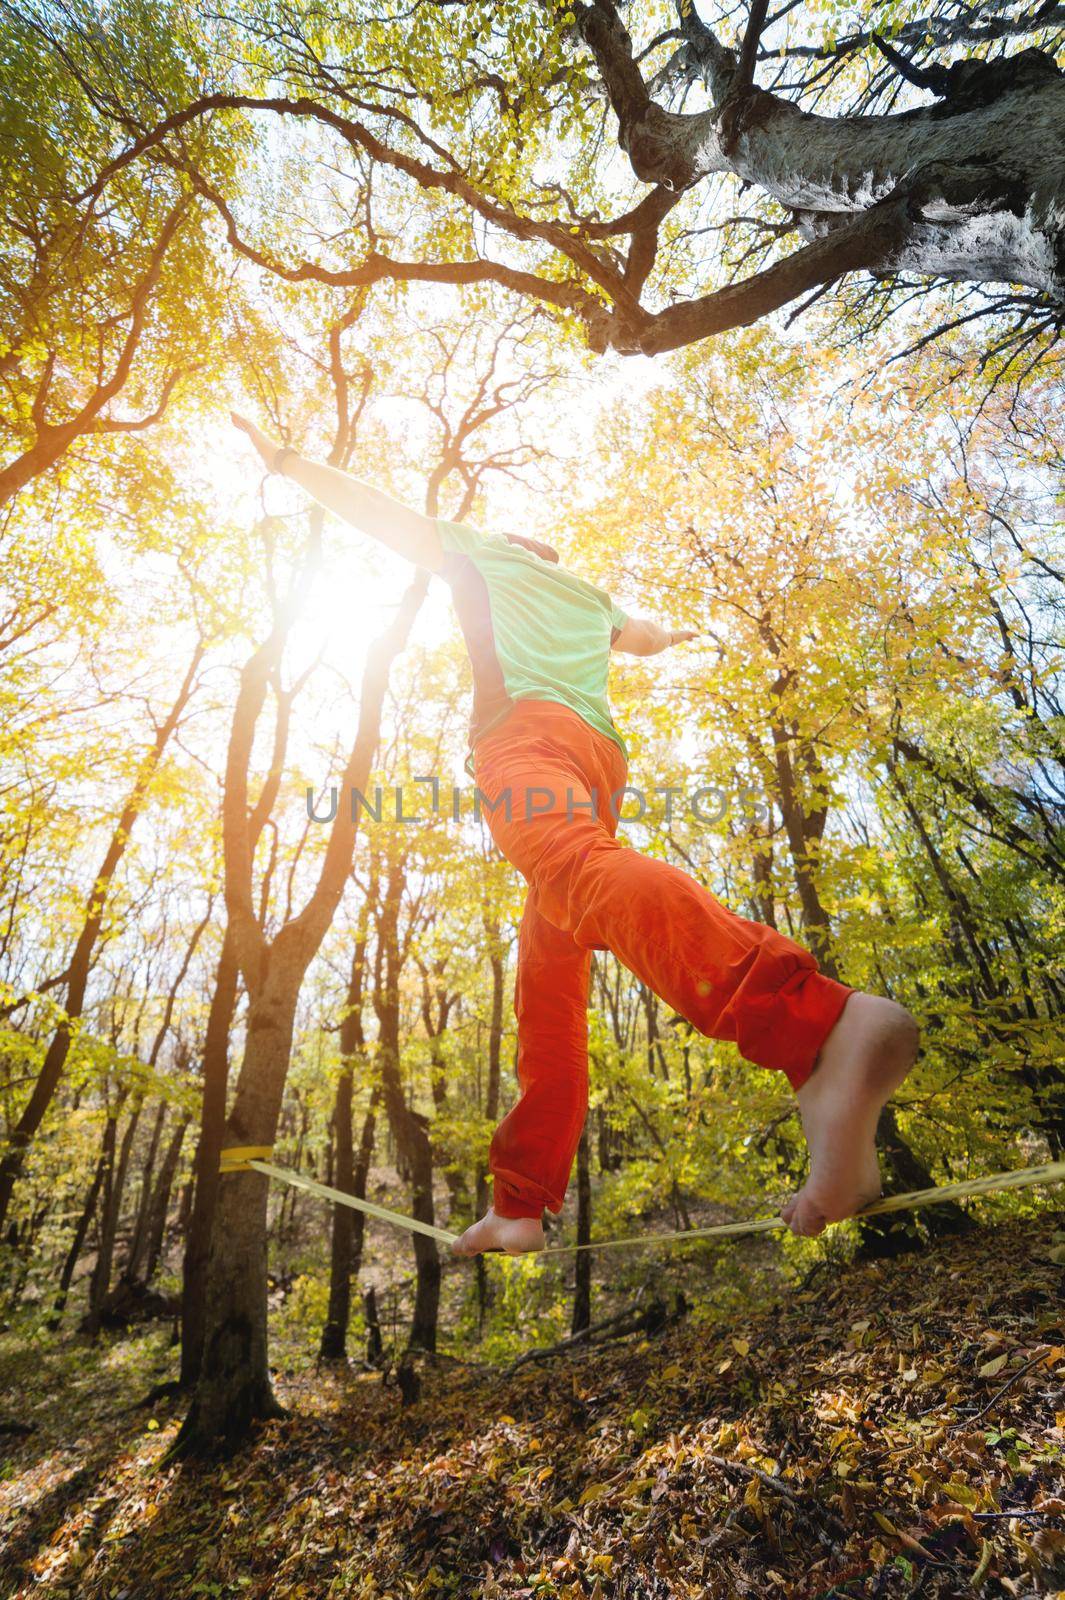 Wide angle male tightrope walker balancing barefoot on slackline in autumn forest. The concept of outdoor sports and active life of people aged.